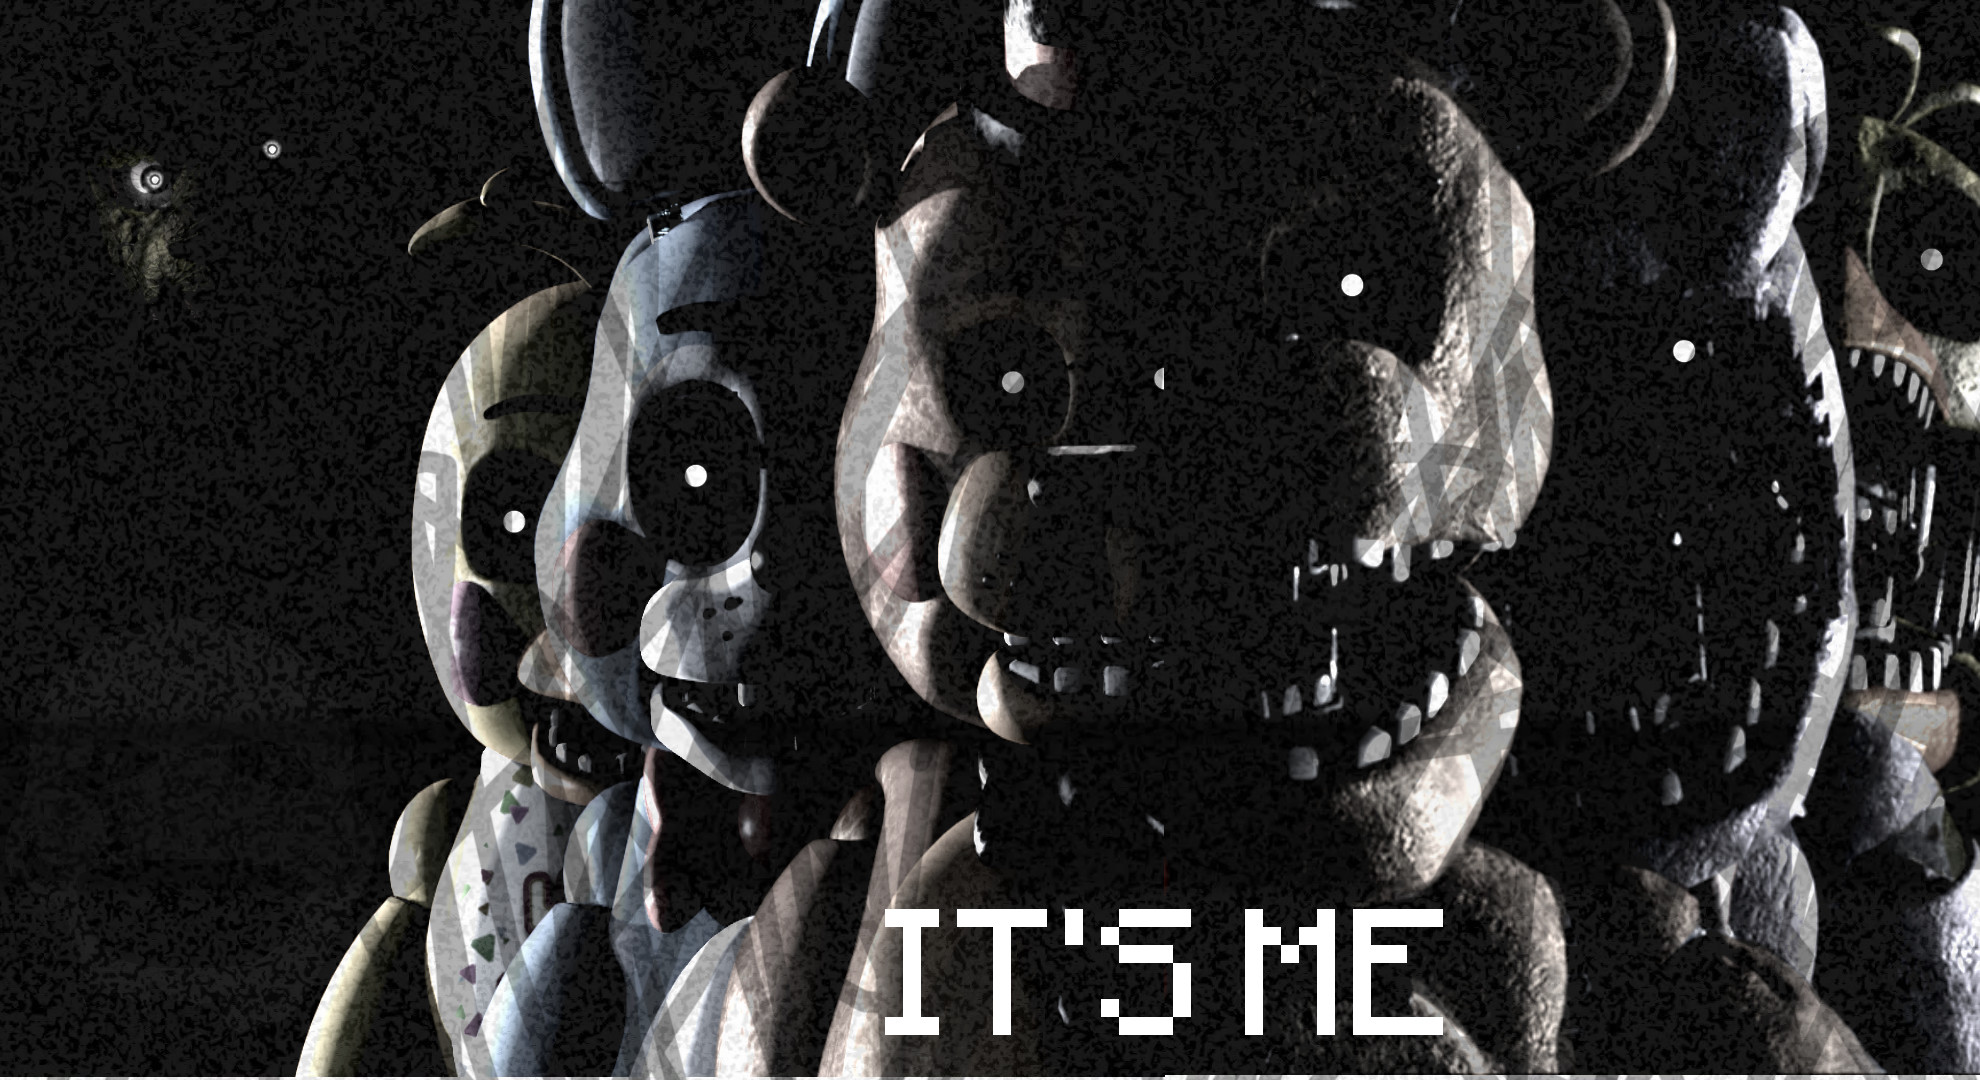 My Own FNAF Wallpaper. You can download it if youd like